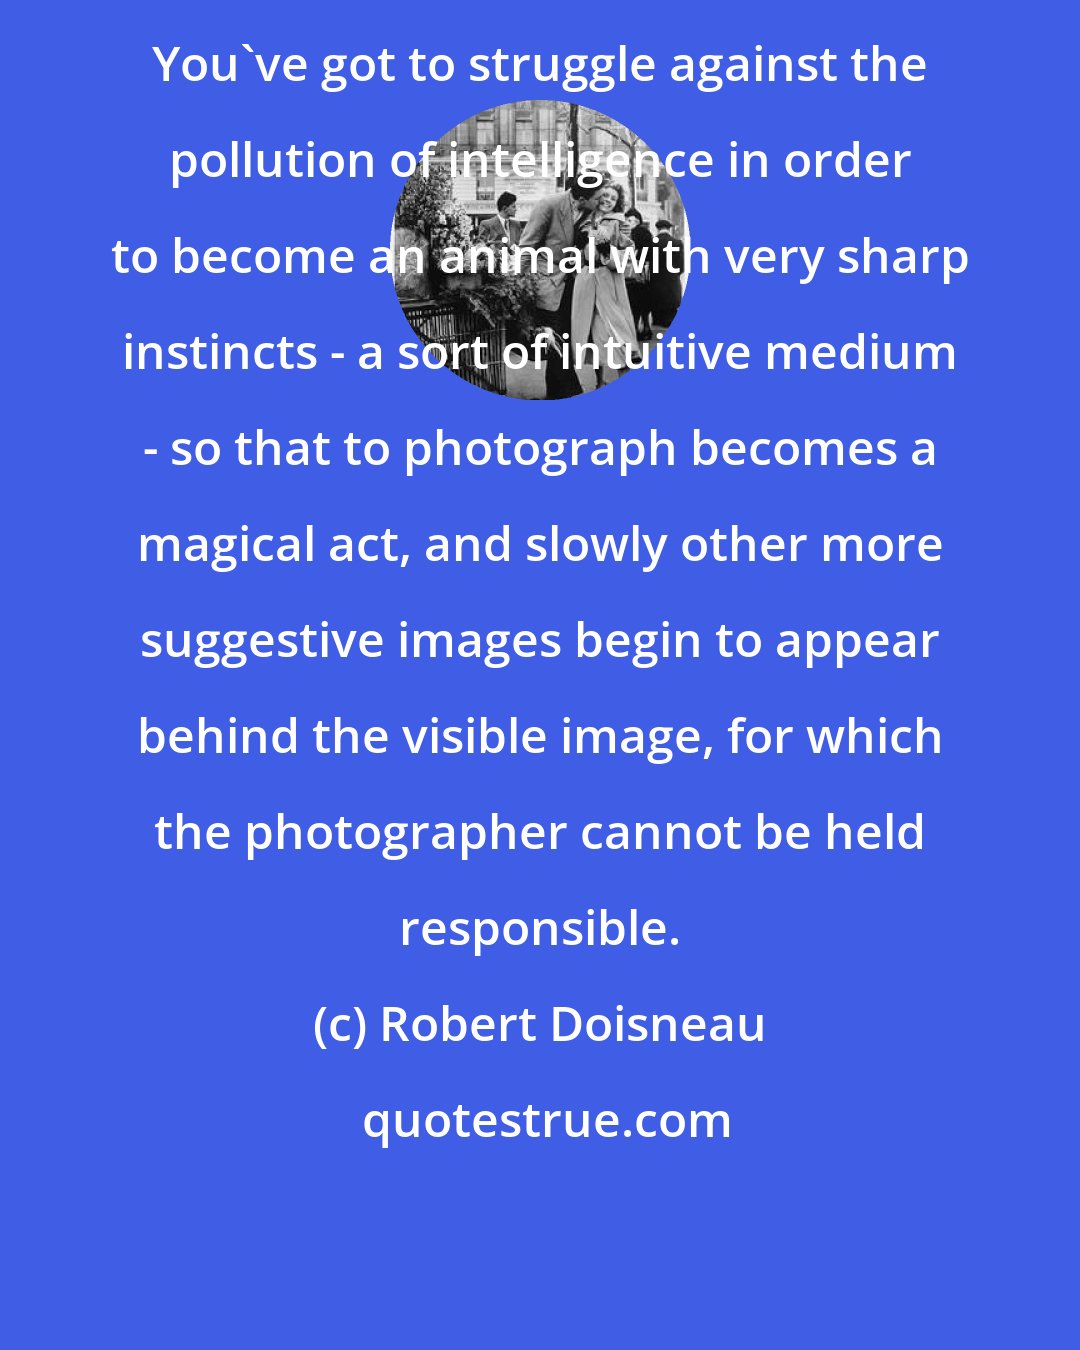 Robert Doisneau: You've got to struggle against the pollution of intelligence in order to become an animal with very sharp instincts - a sort of intuitive medium - so that to photograph becomes a magical act, and slowly other more suggestive images begin to appear behind the visible image, for which the photographer cannot be held responsible.